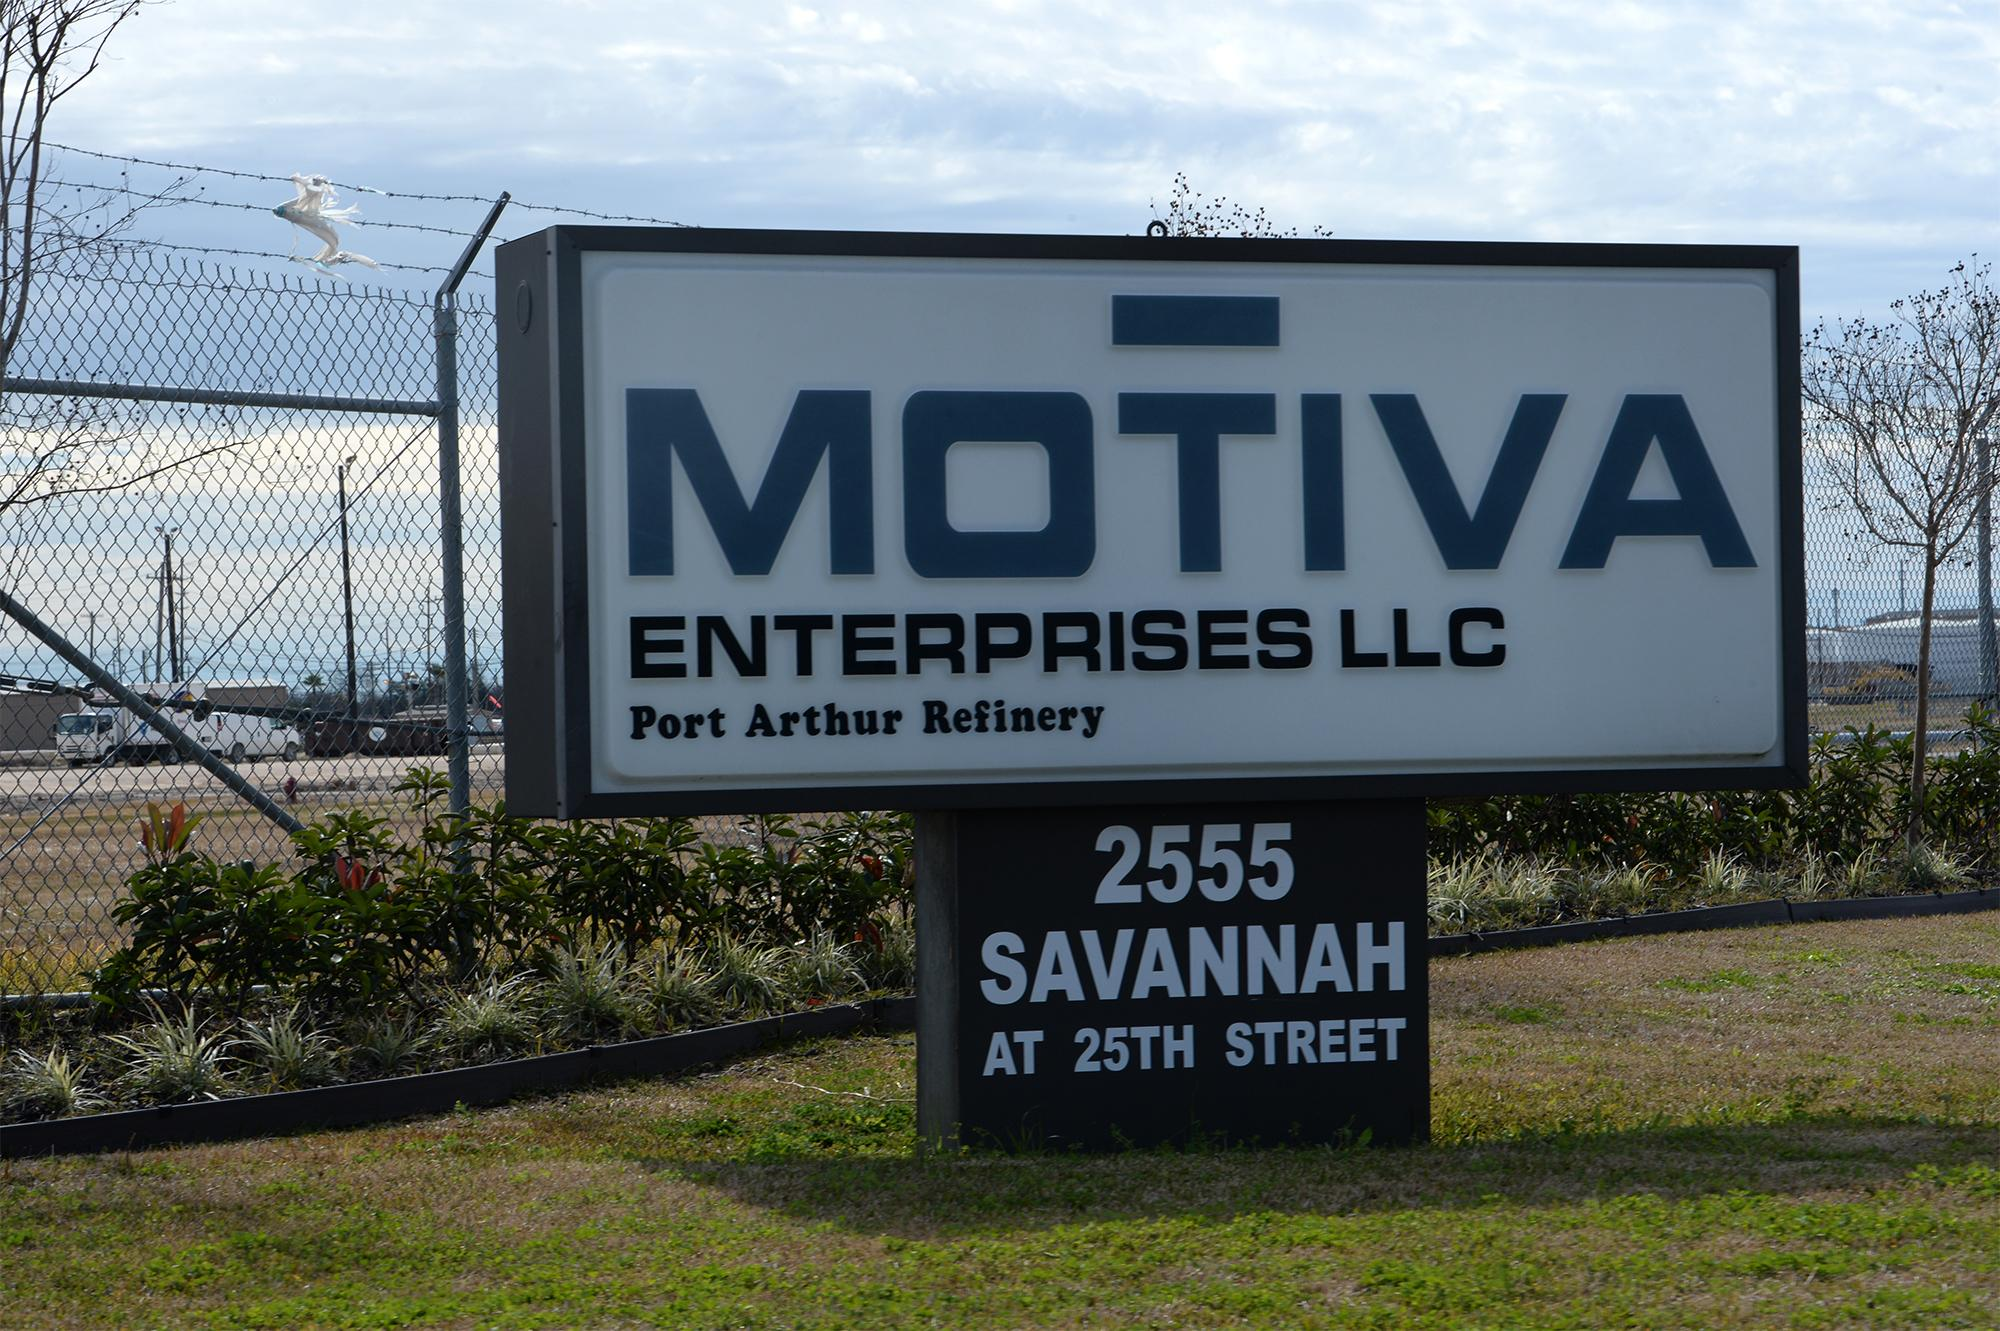 Industrial/Refinery Marquee Signs - Louisiana Sign Guy | Signs, Cards, Billboards, and Brochures